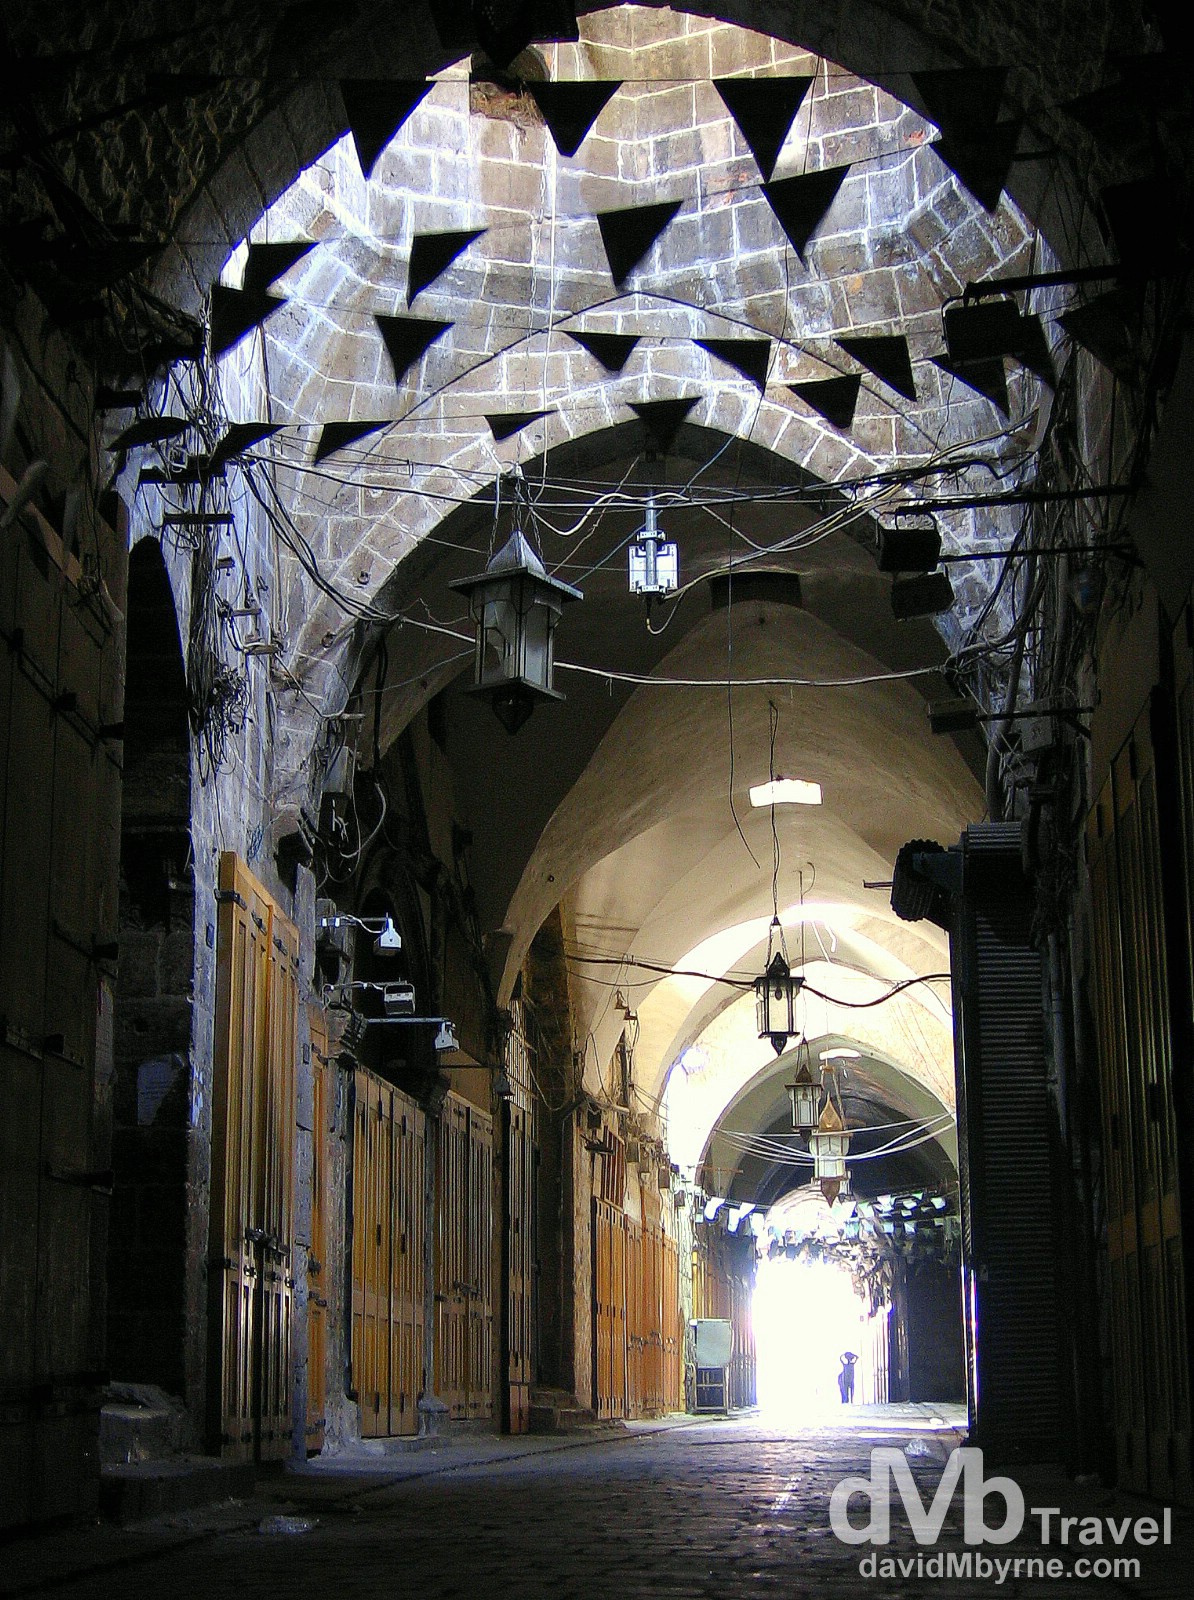 A section of the empty al-Madina souq in Aleppo, Syria. May 9, 2008.